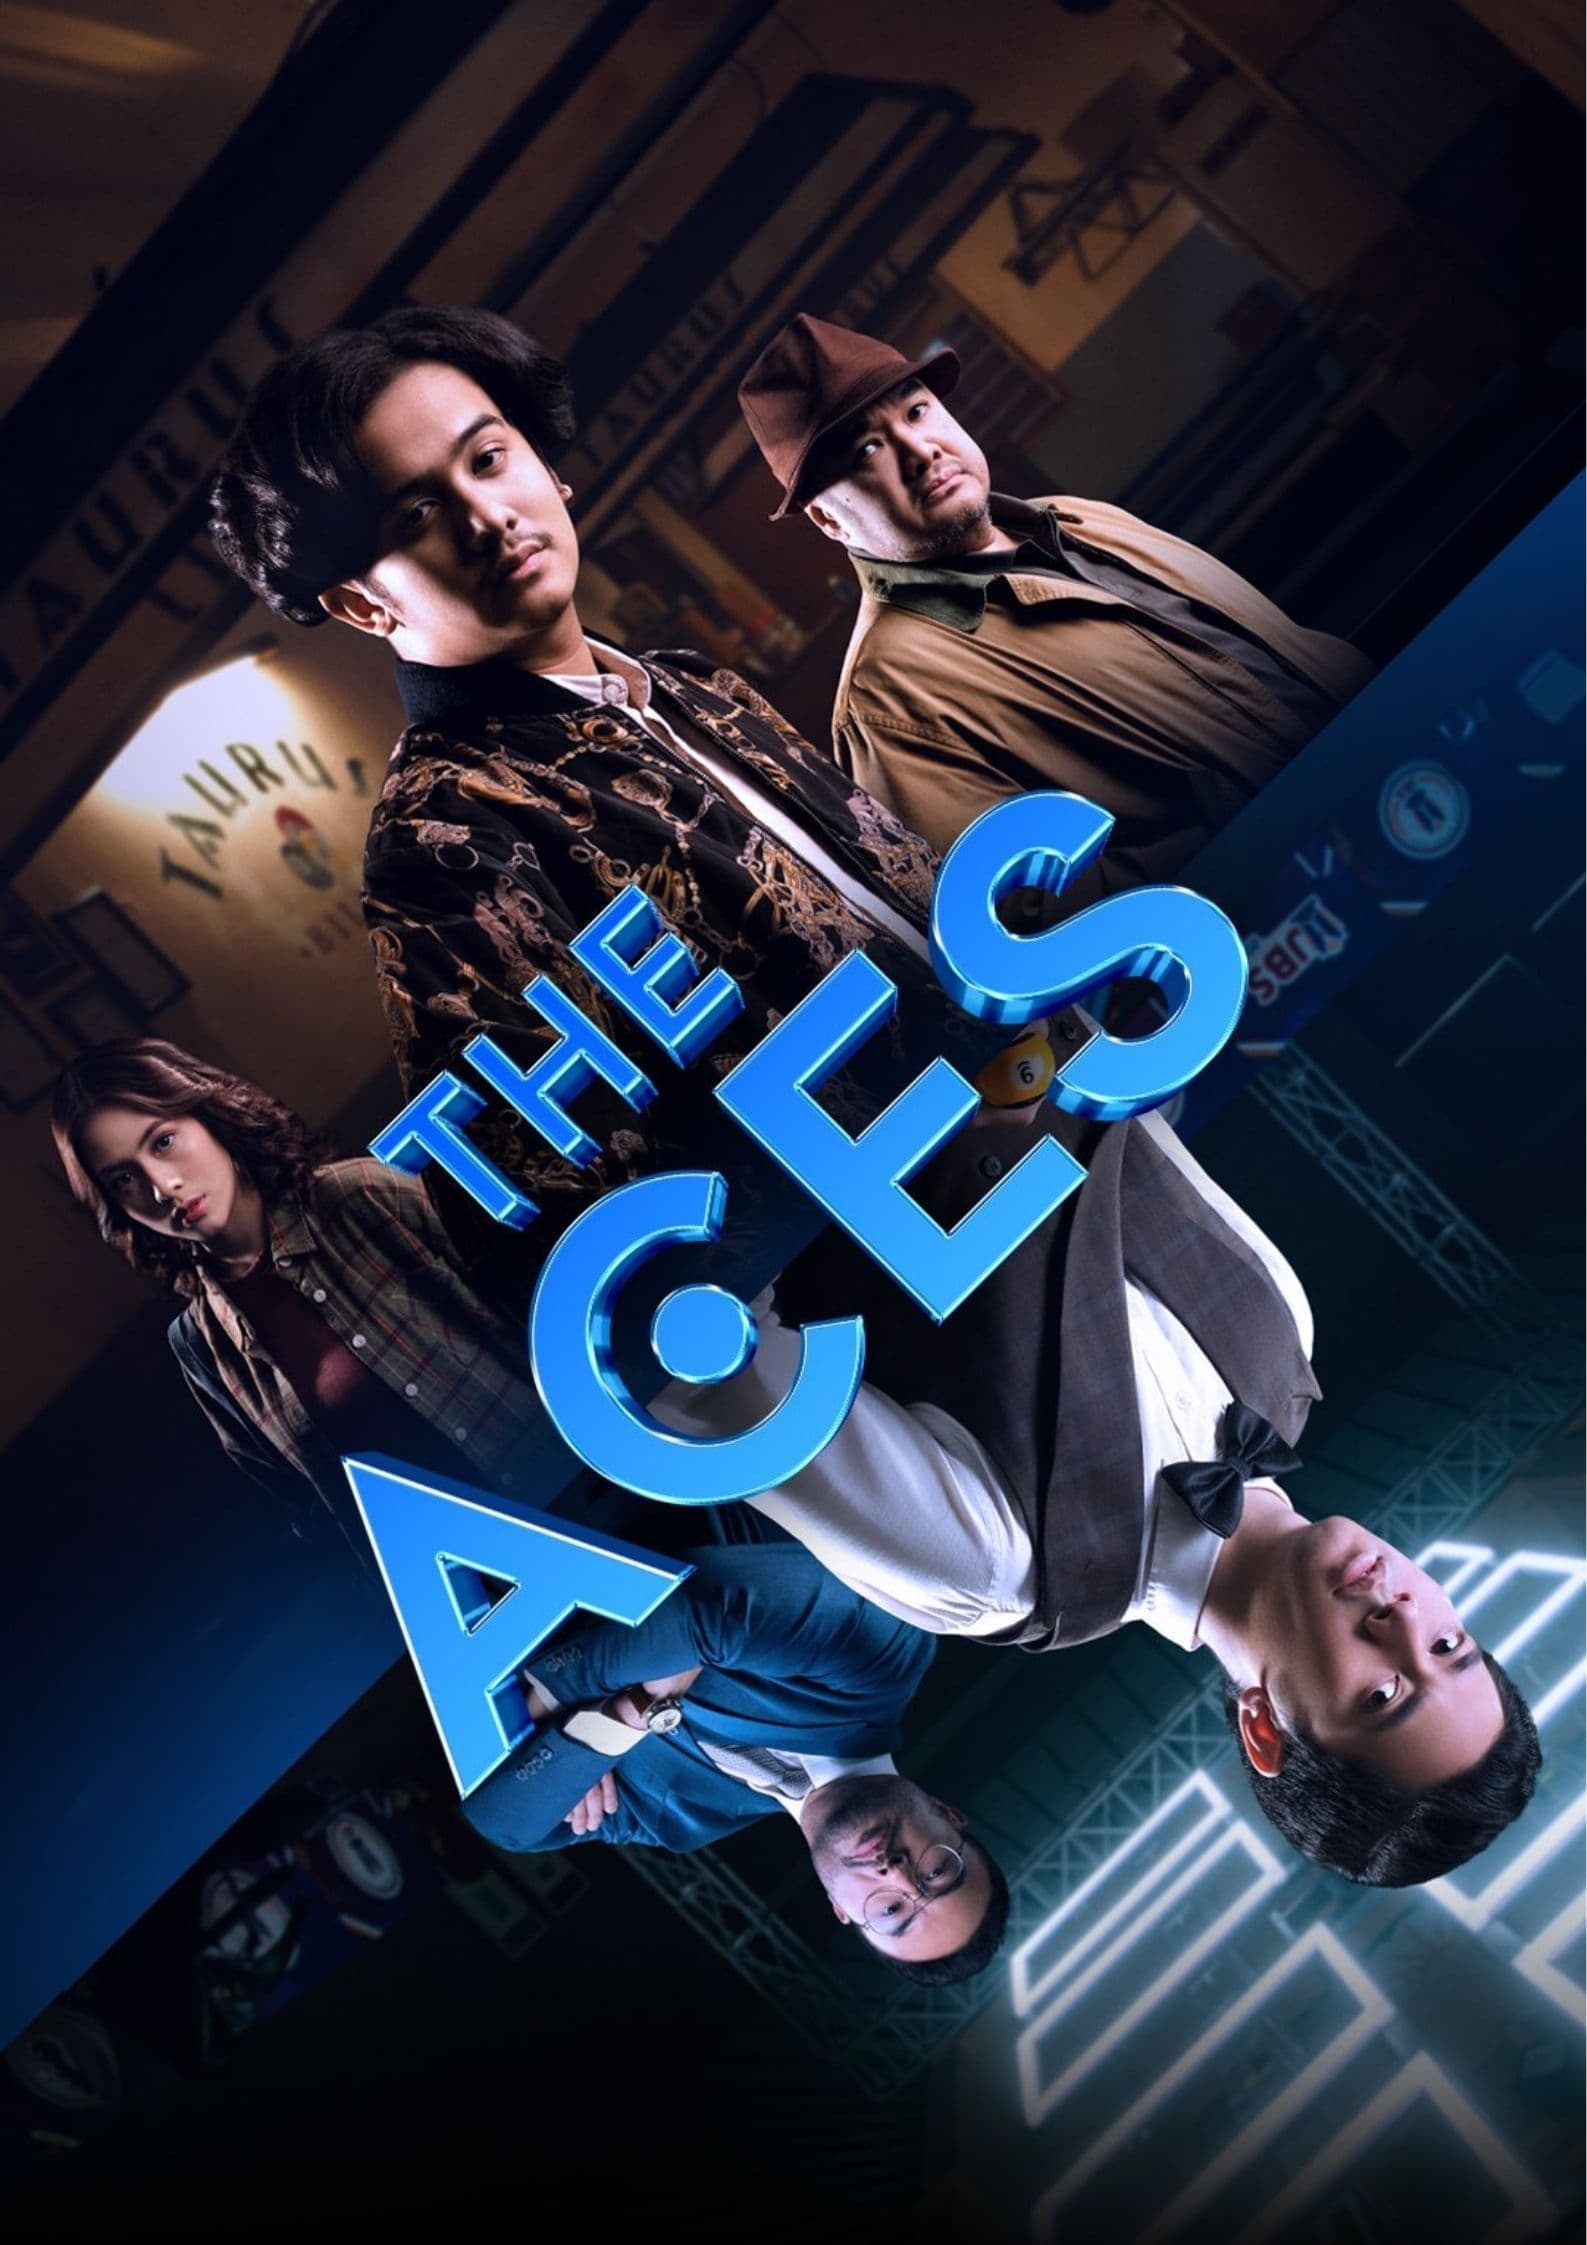 The Aces